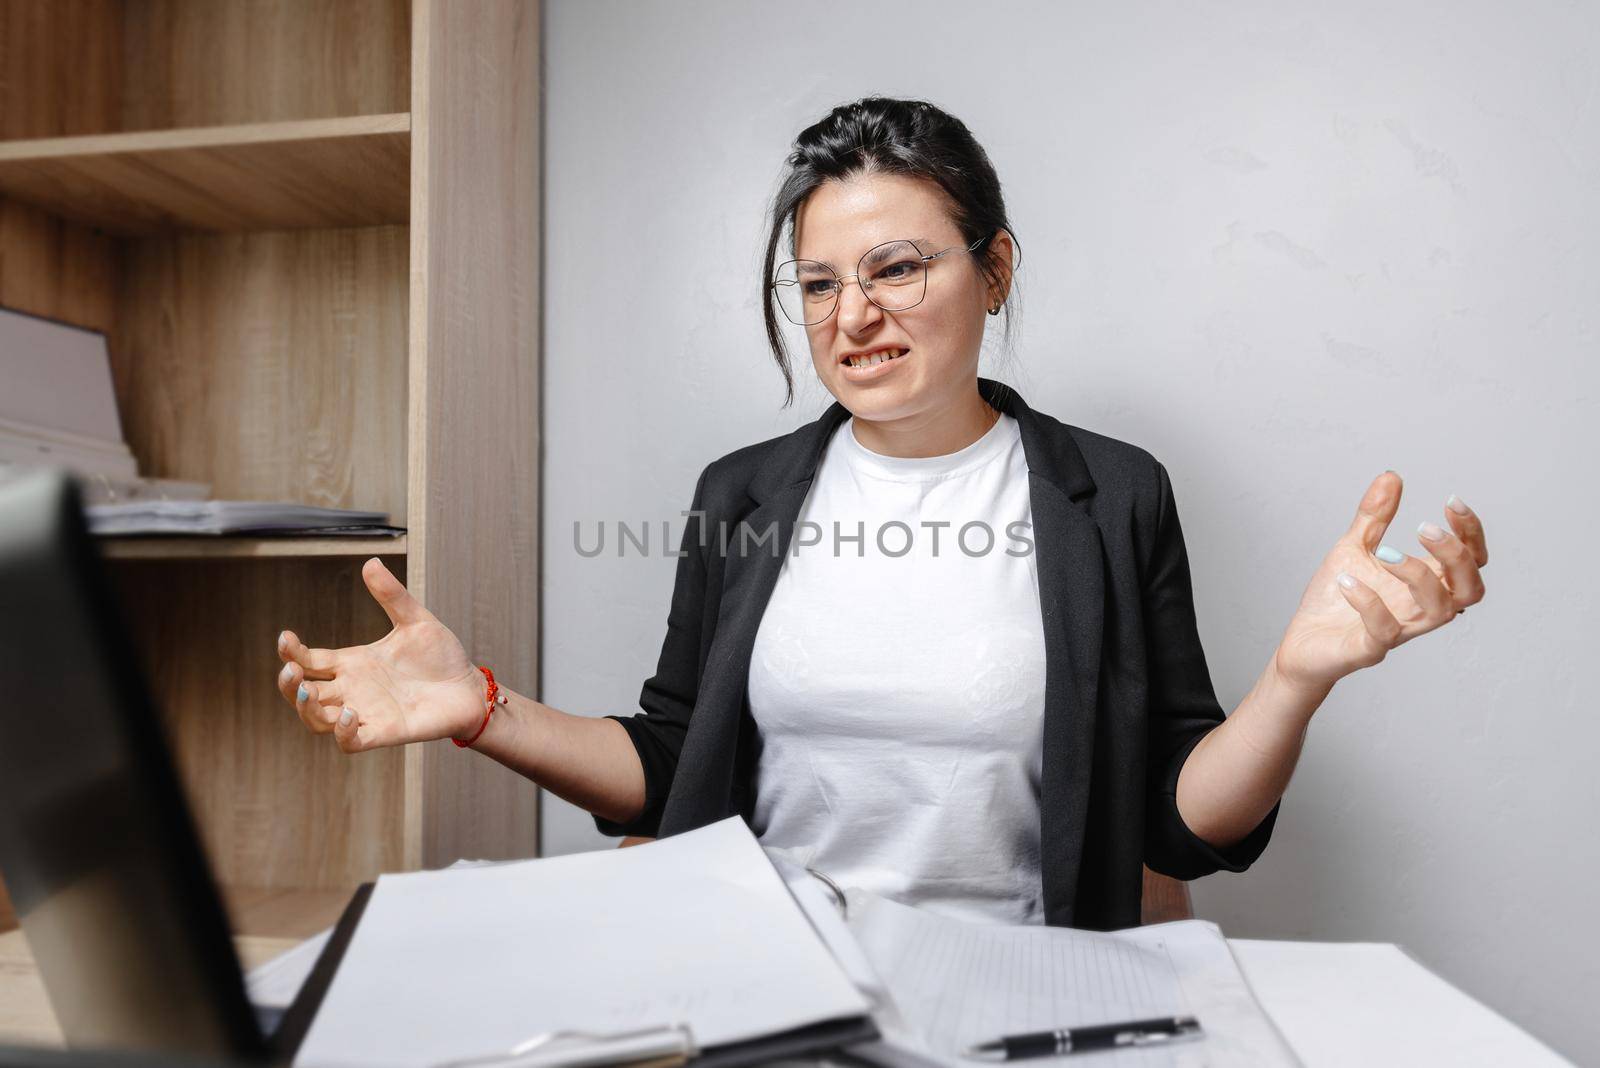 young attractive businesswoman frustrated and desperate expression in the office working on a laptop computer in stress at work concept screaming angry with sad.